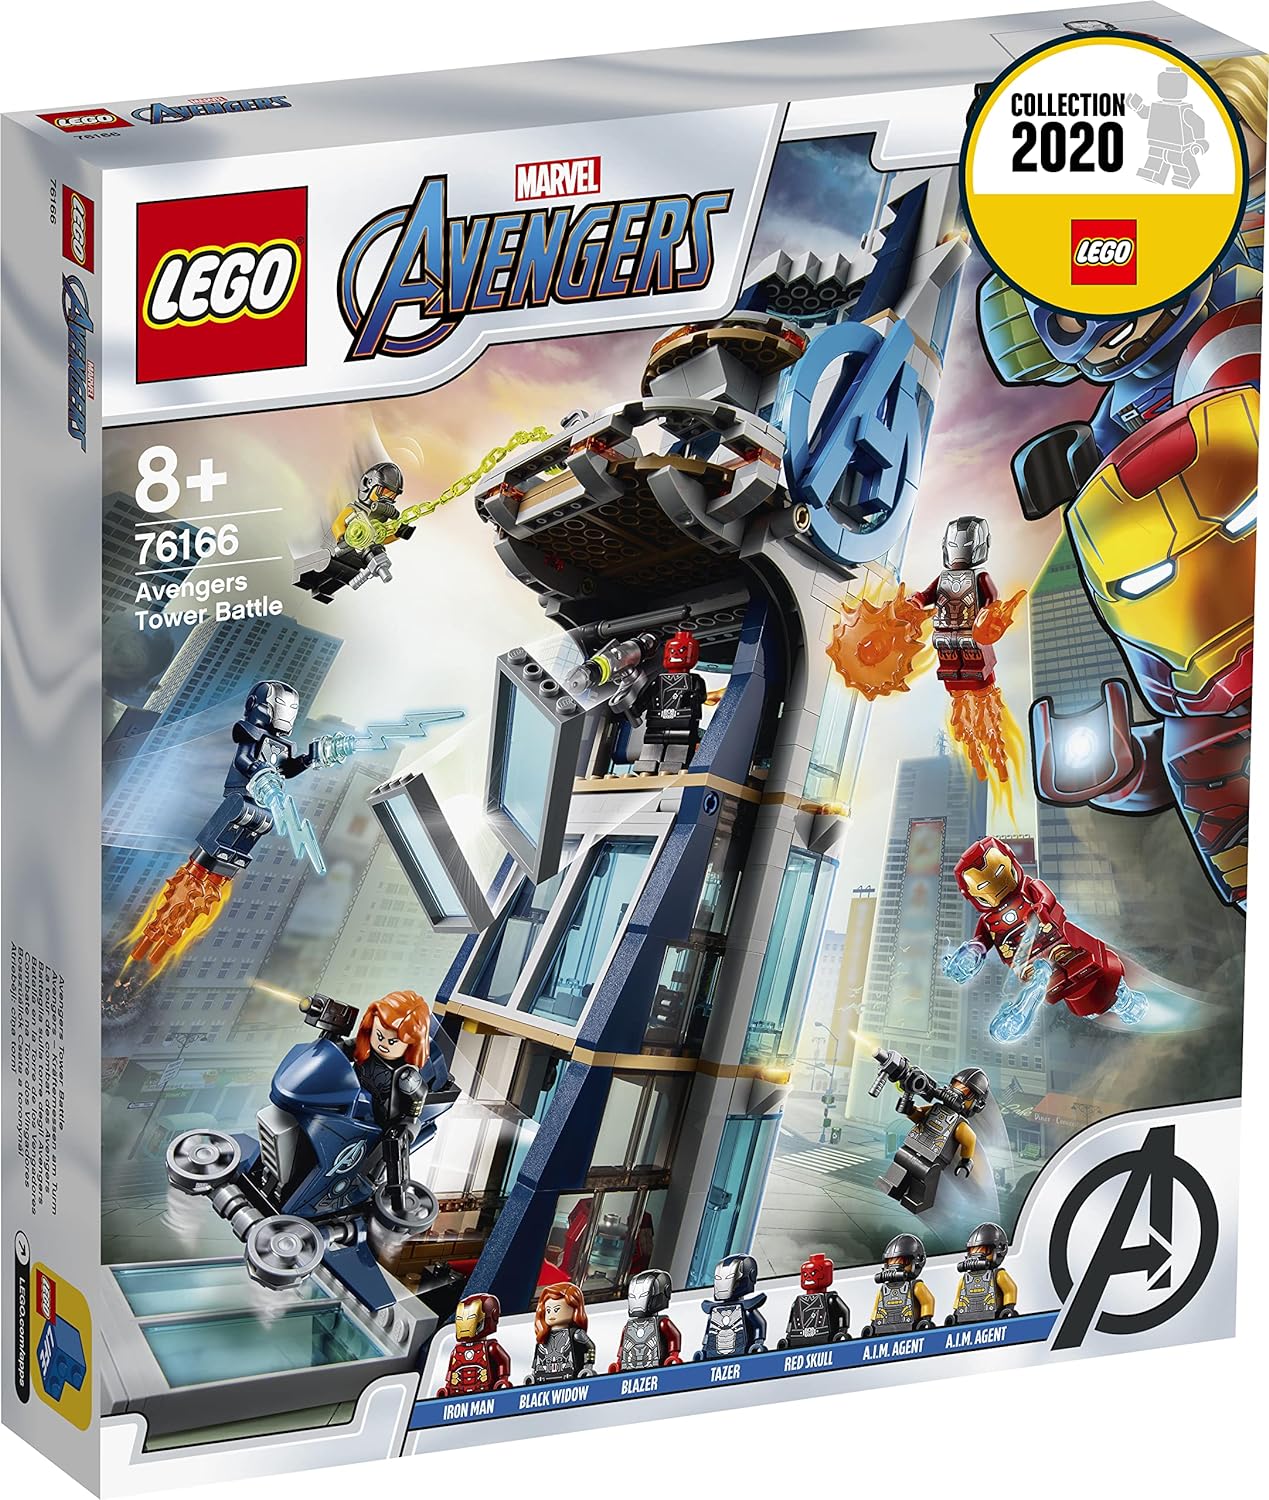 Lego 76166 Marvel Avengers Tower Battle Set with Iron Man, Black Widow & Red Skull